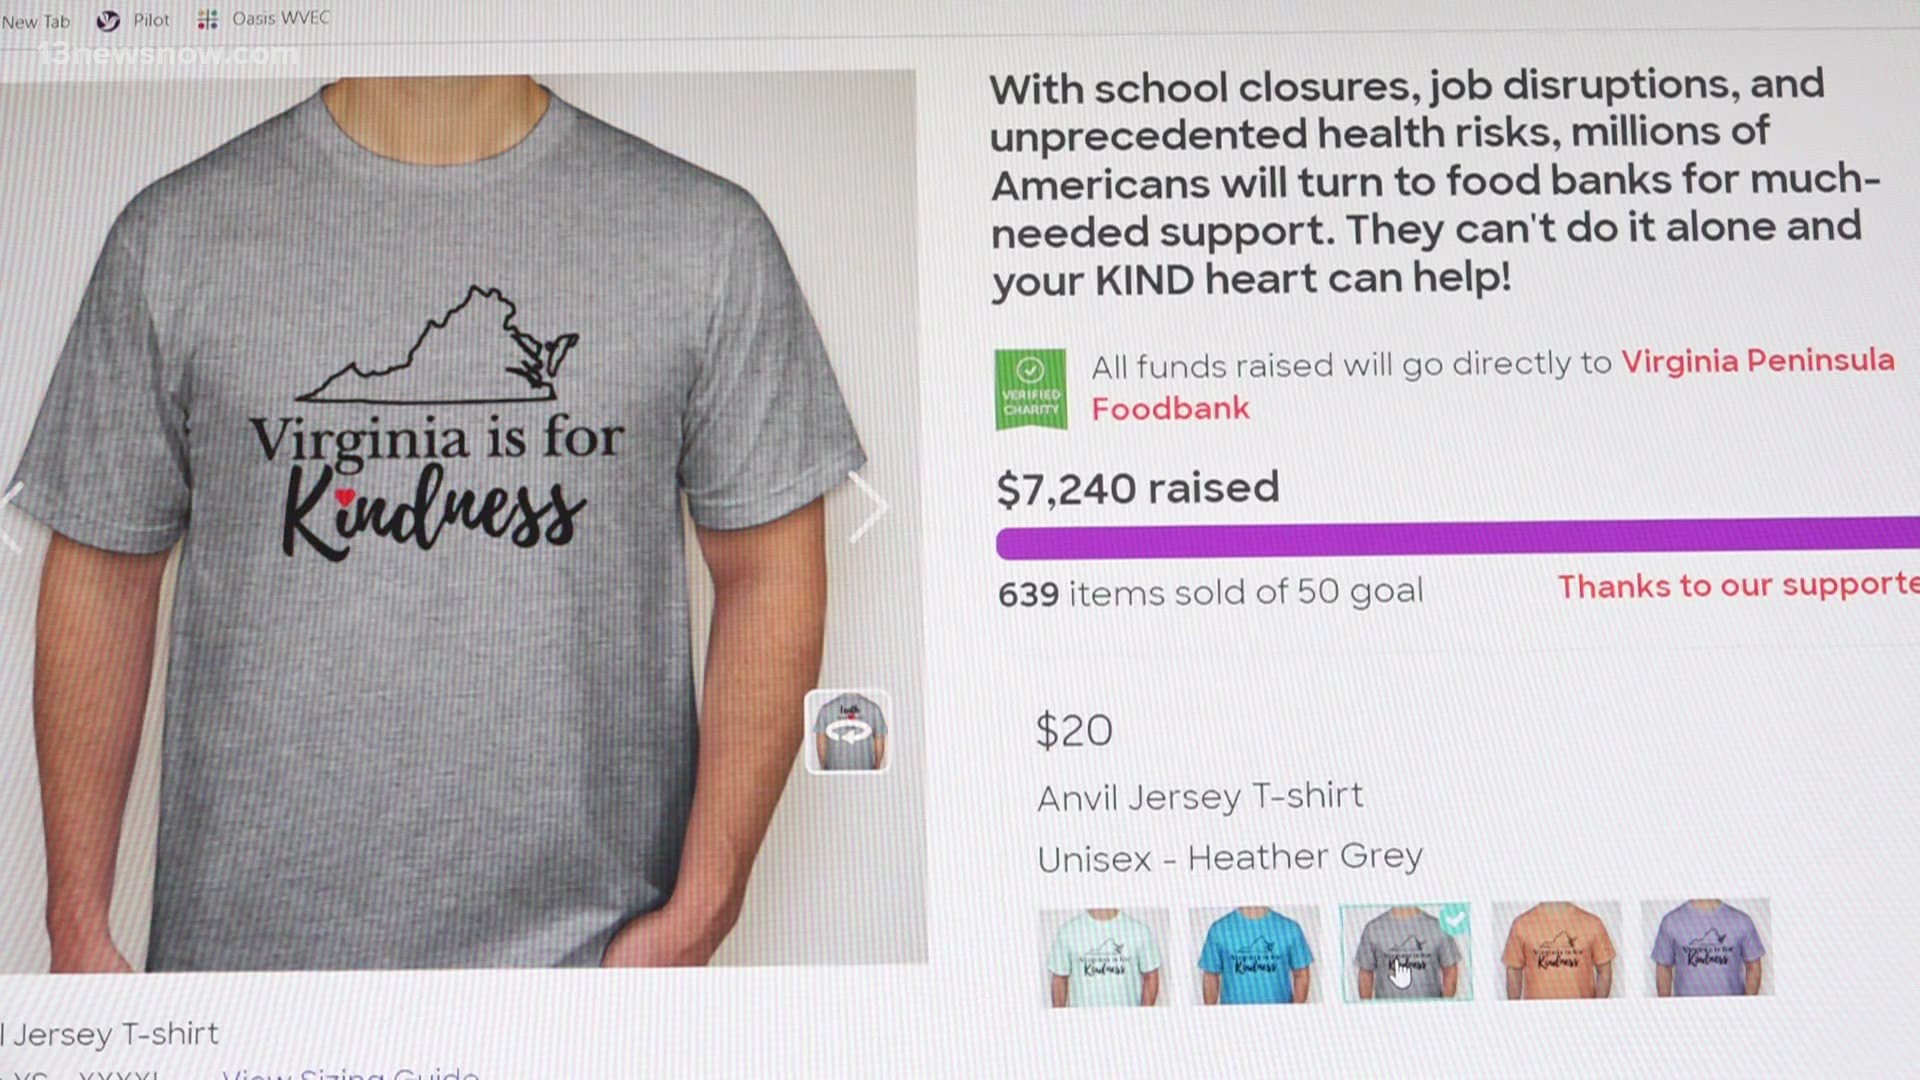 'Virginia is for Kindness' shirt sales have raised thousands of dollars for organizations trying to help anyone struggling during the pandemic.